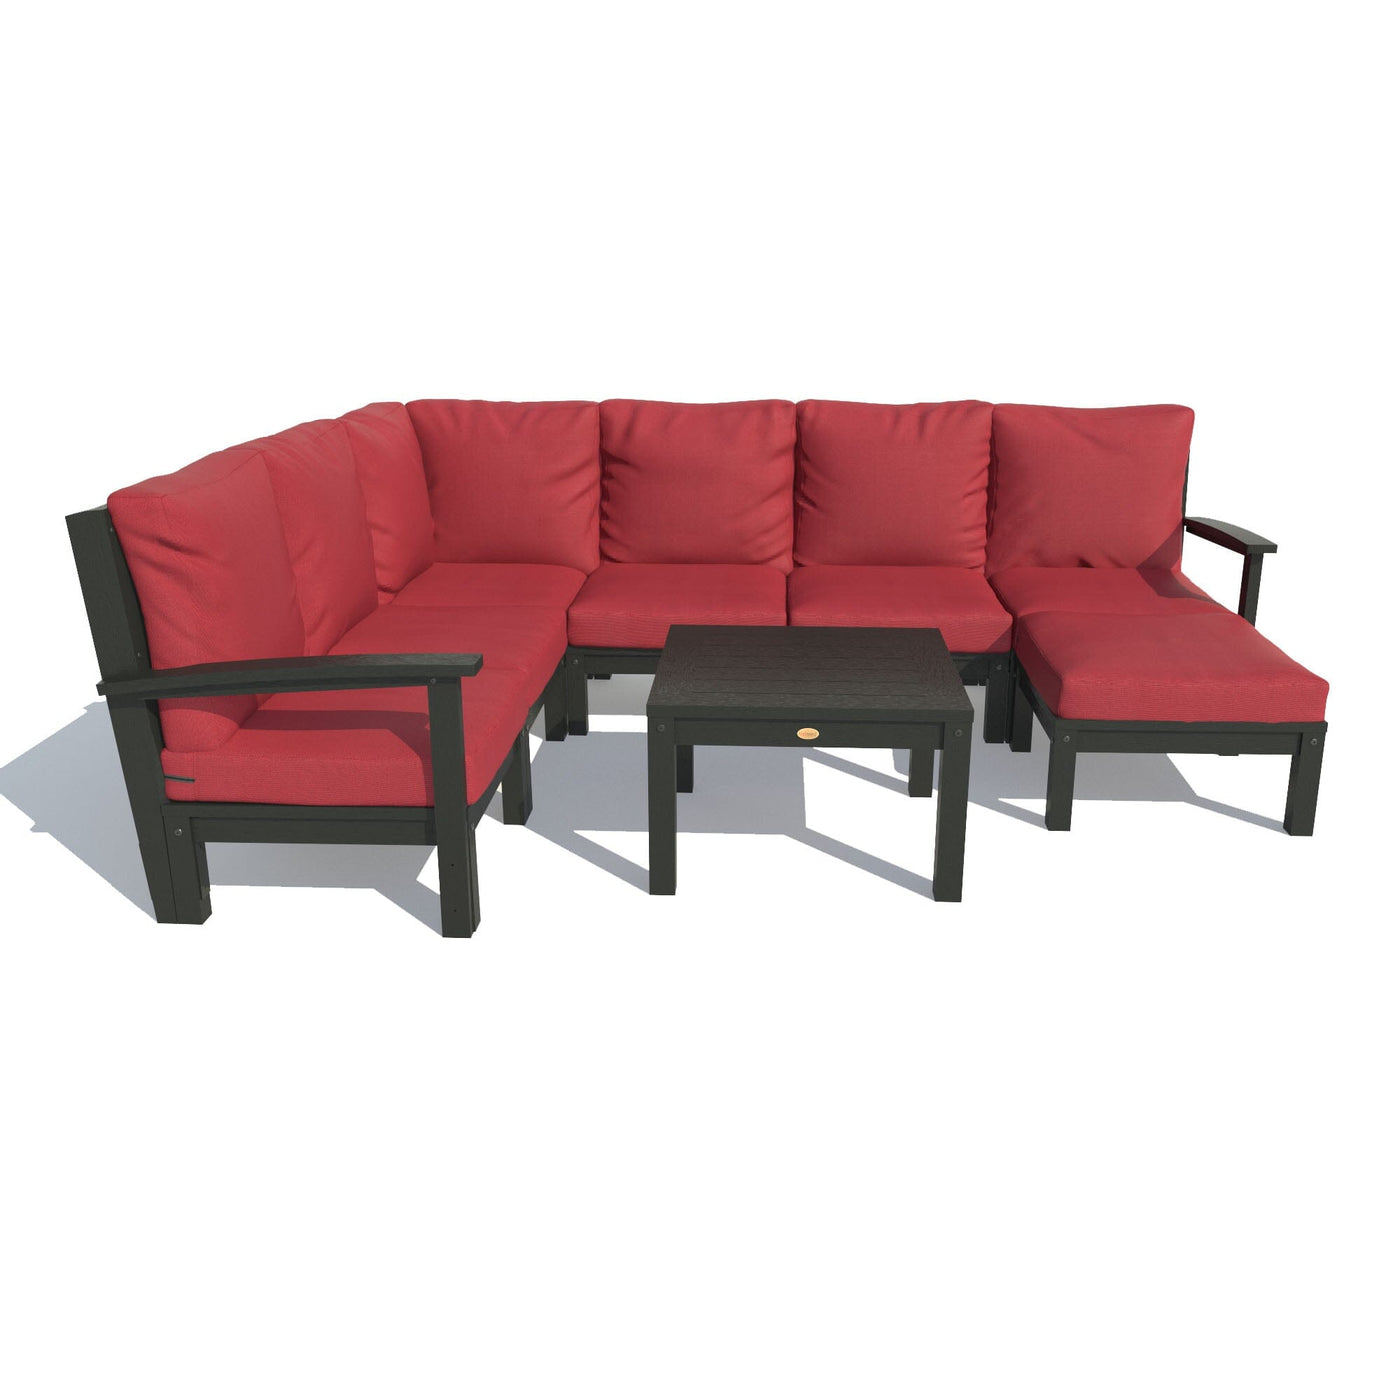 Bespoke Deep Seating: 8 Piece Sectional Sofa Set with Ottoman and Side Table Deep Seating Highwood USA Firecracker Red Black 